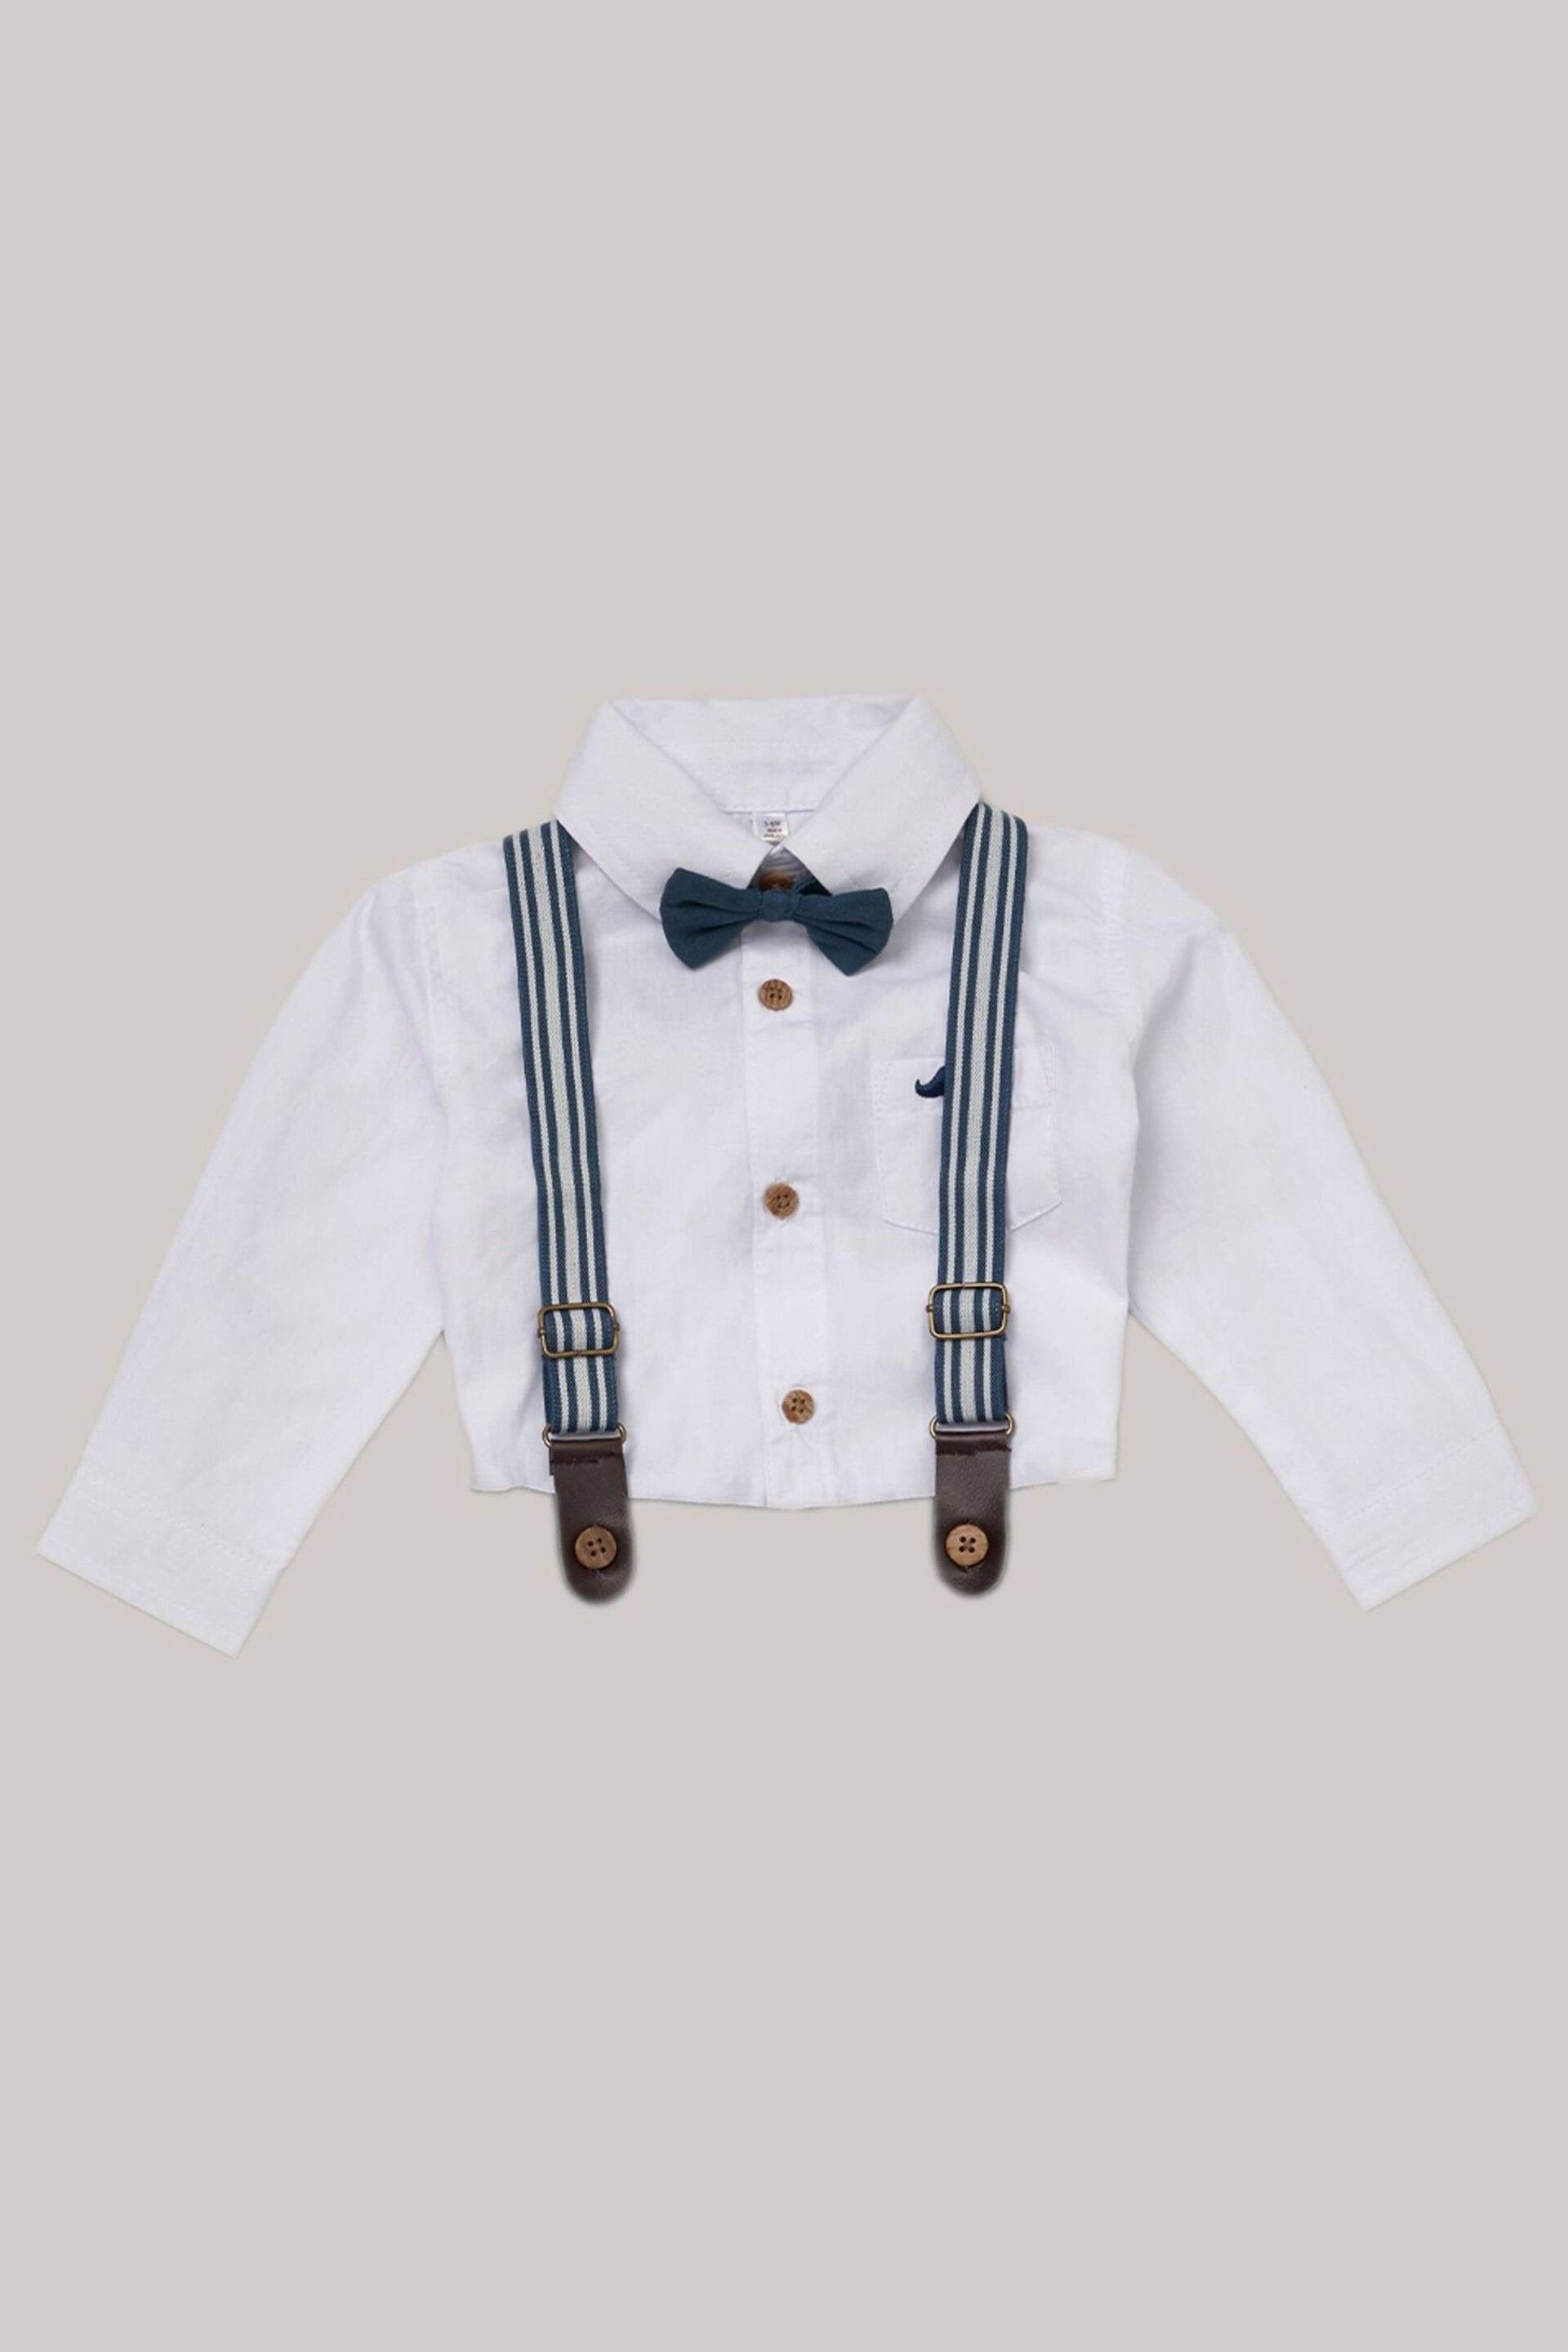 Little Gent Baby Mock Shirt Bodysuit and Braces Cotton Dungarees - Image 2 of 4